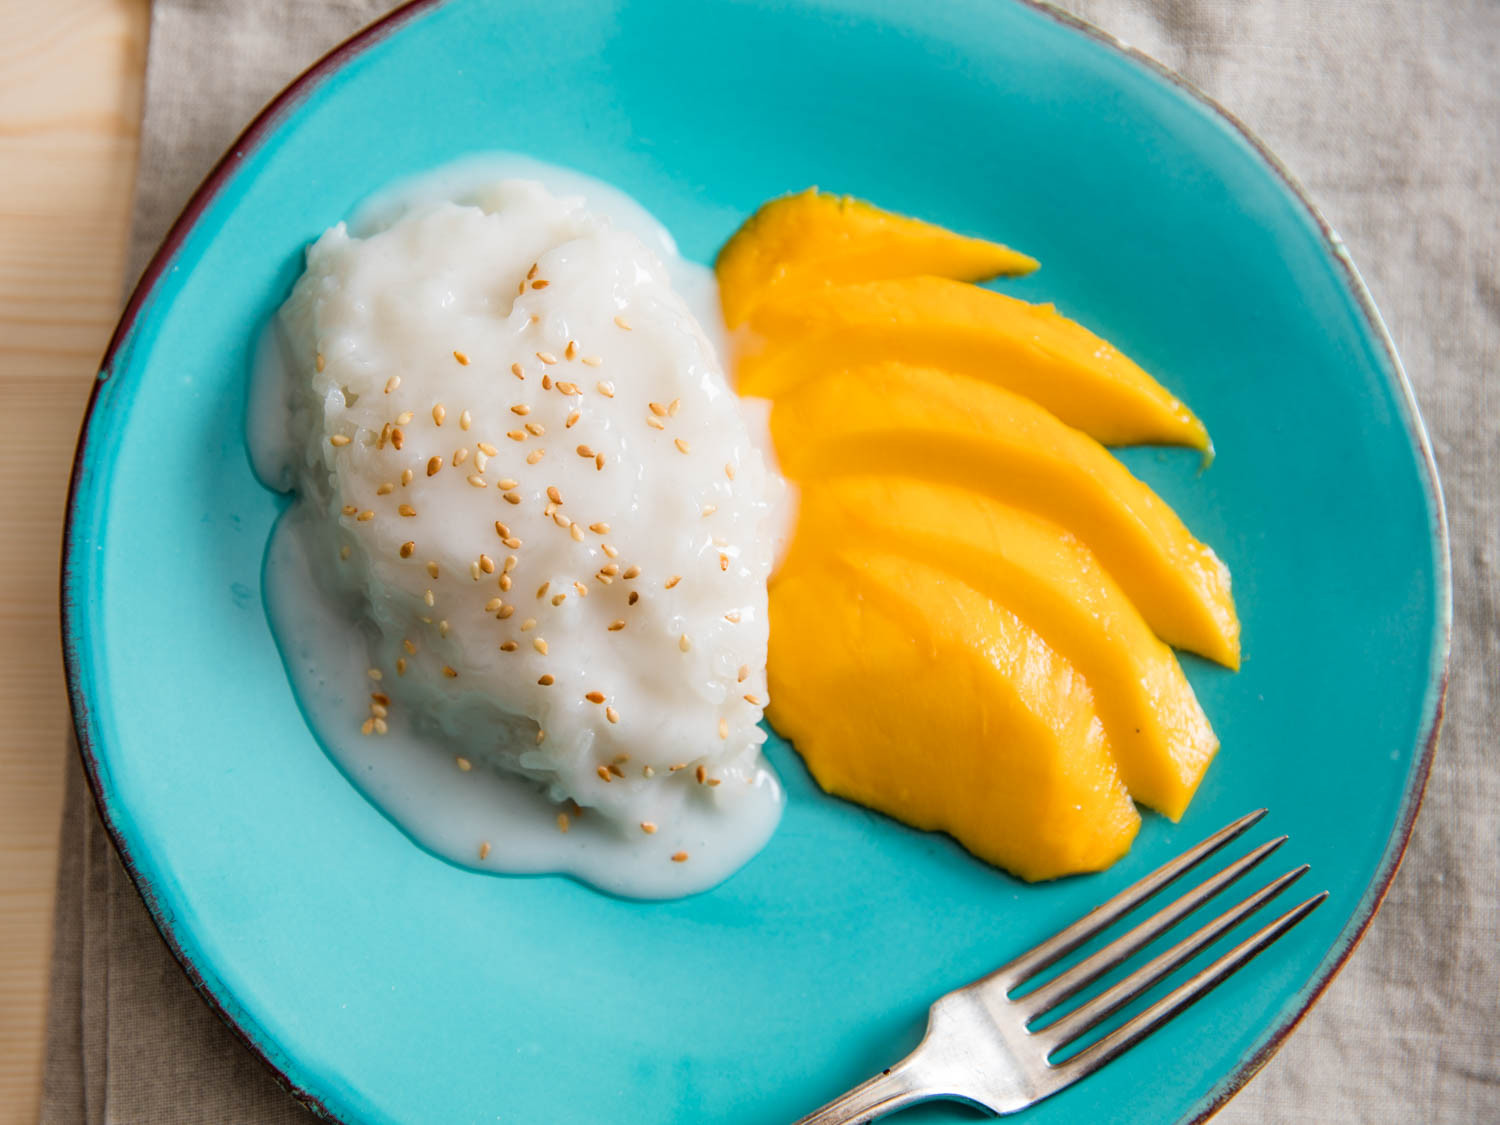 Thai Desserts With Coconut Milk
 Thai Coconut Sticky Rice With Mango Khao Niao Mamuang